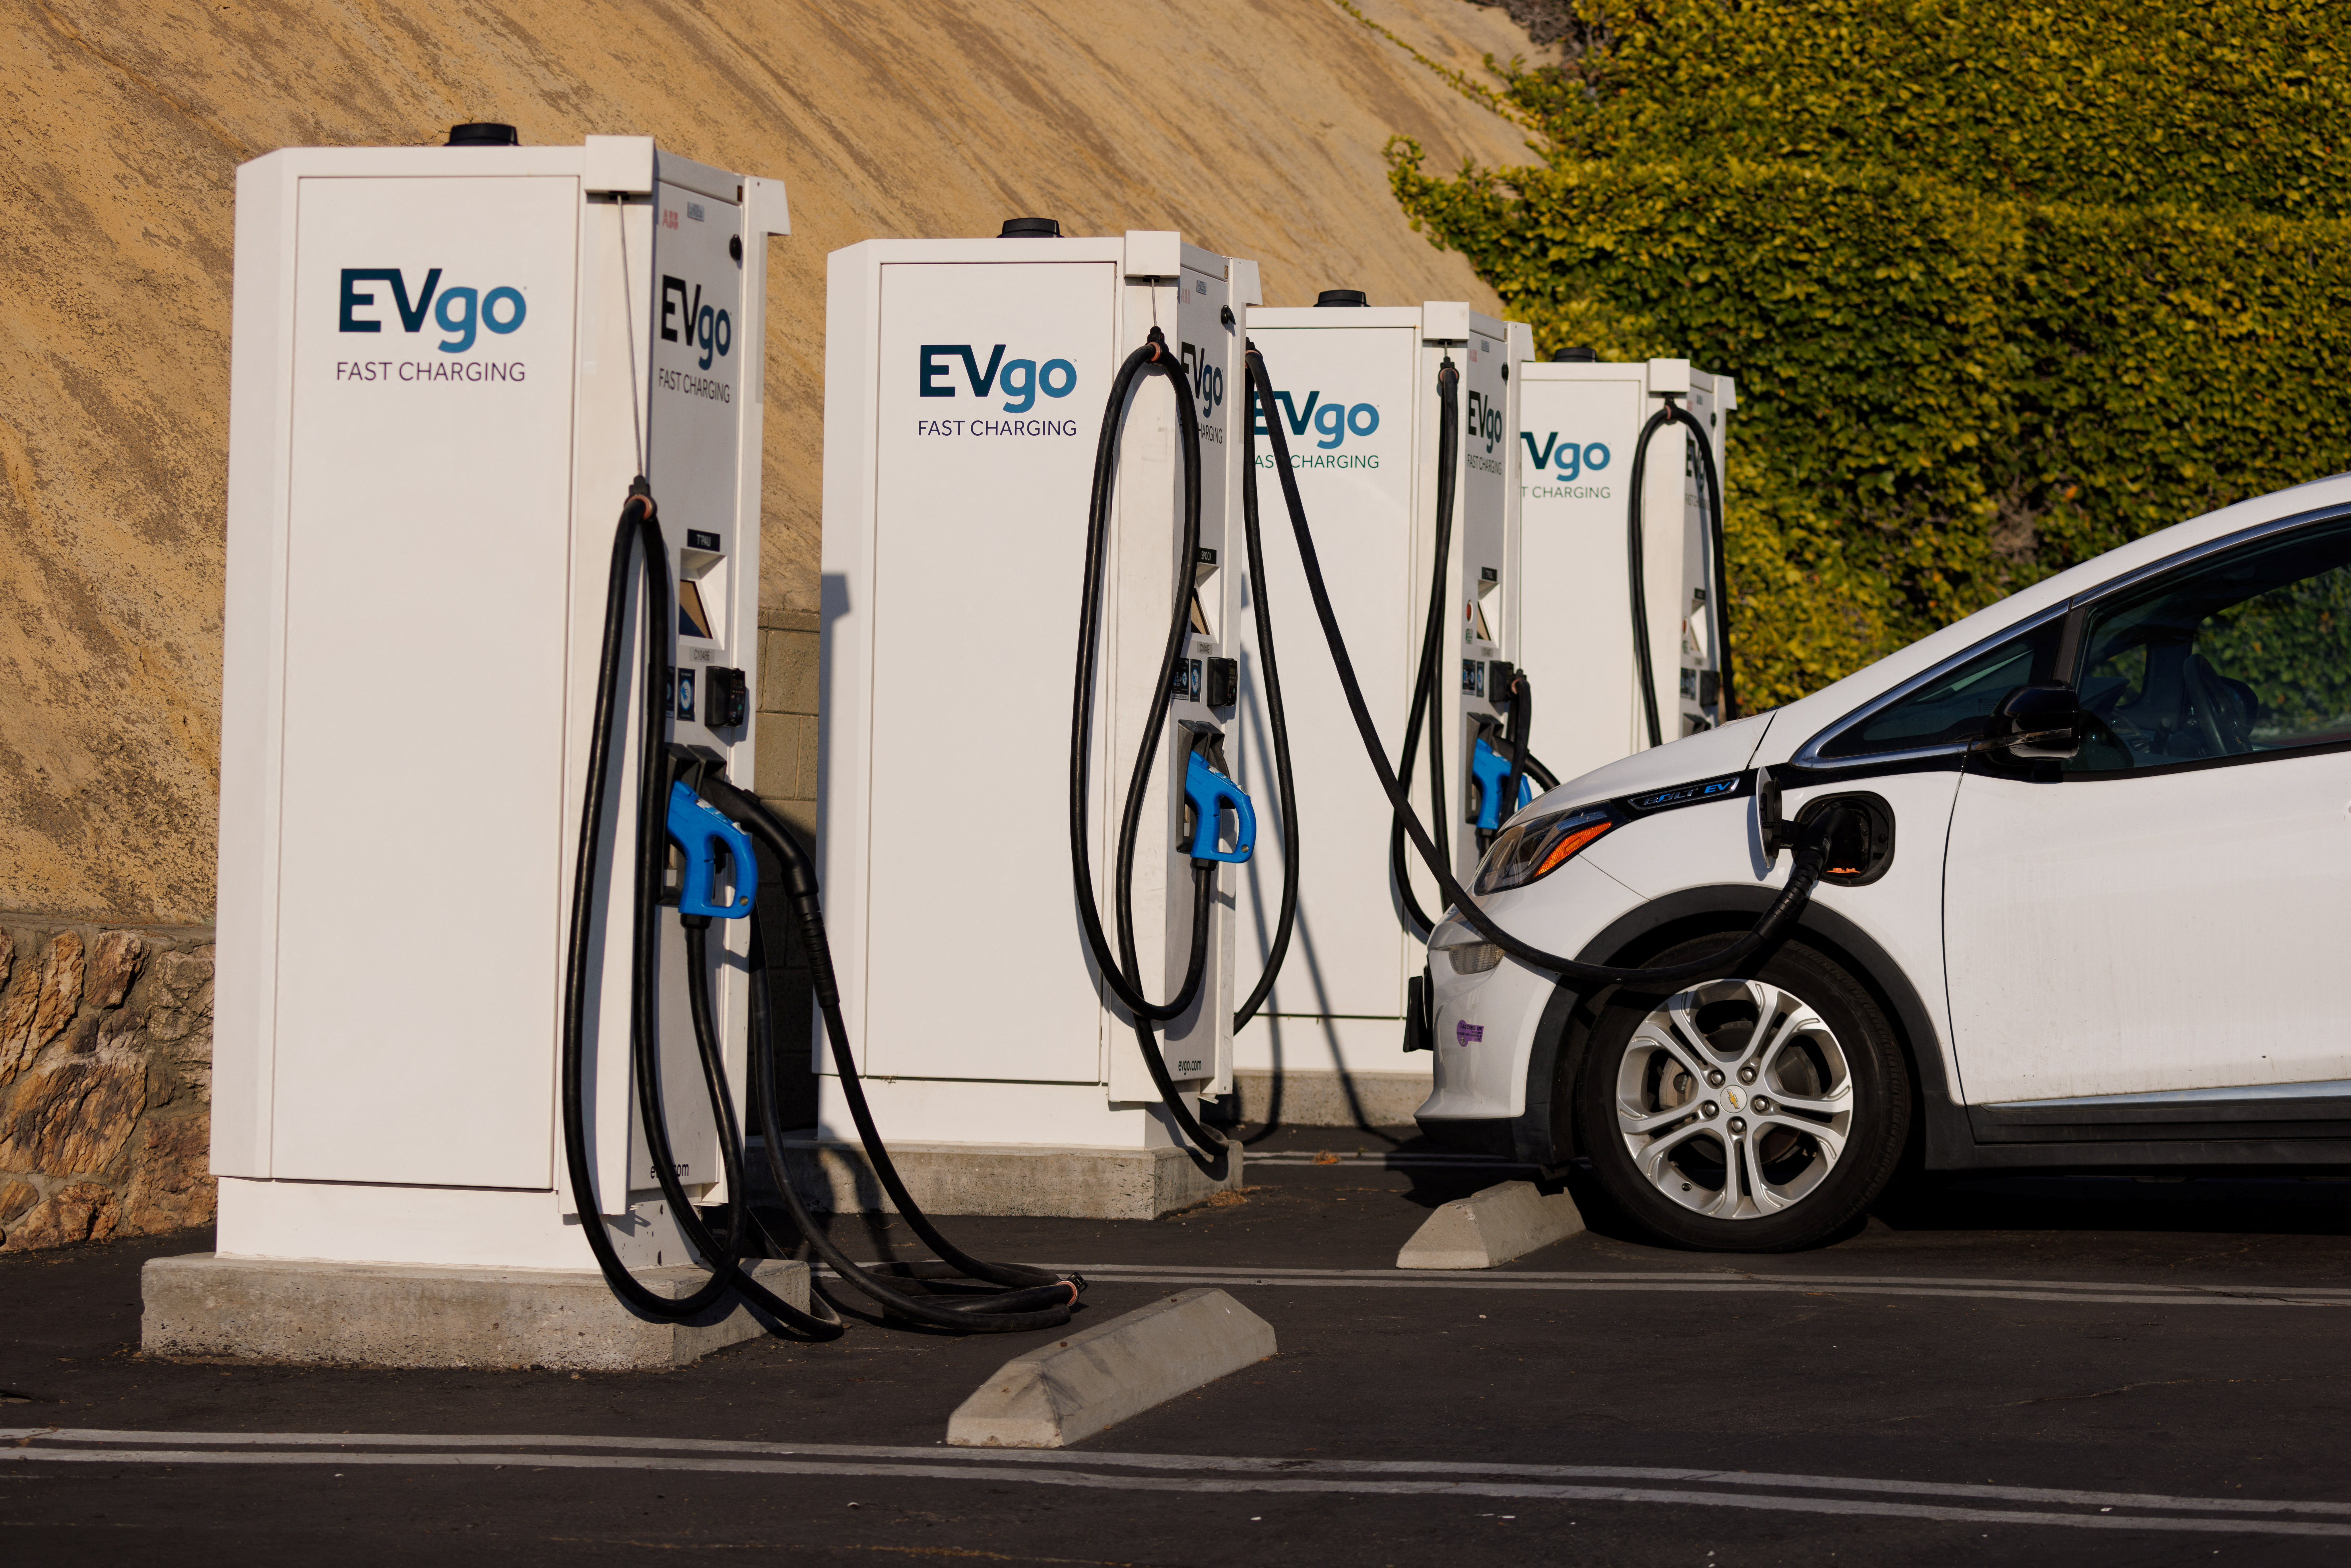 The EU is trying to roll out millions of EV charging points – the lack of which presents a barrier to consumers switching from fossil fuels. /Mike Blake/Reuters